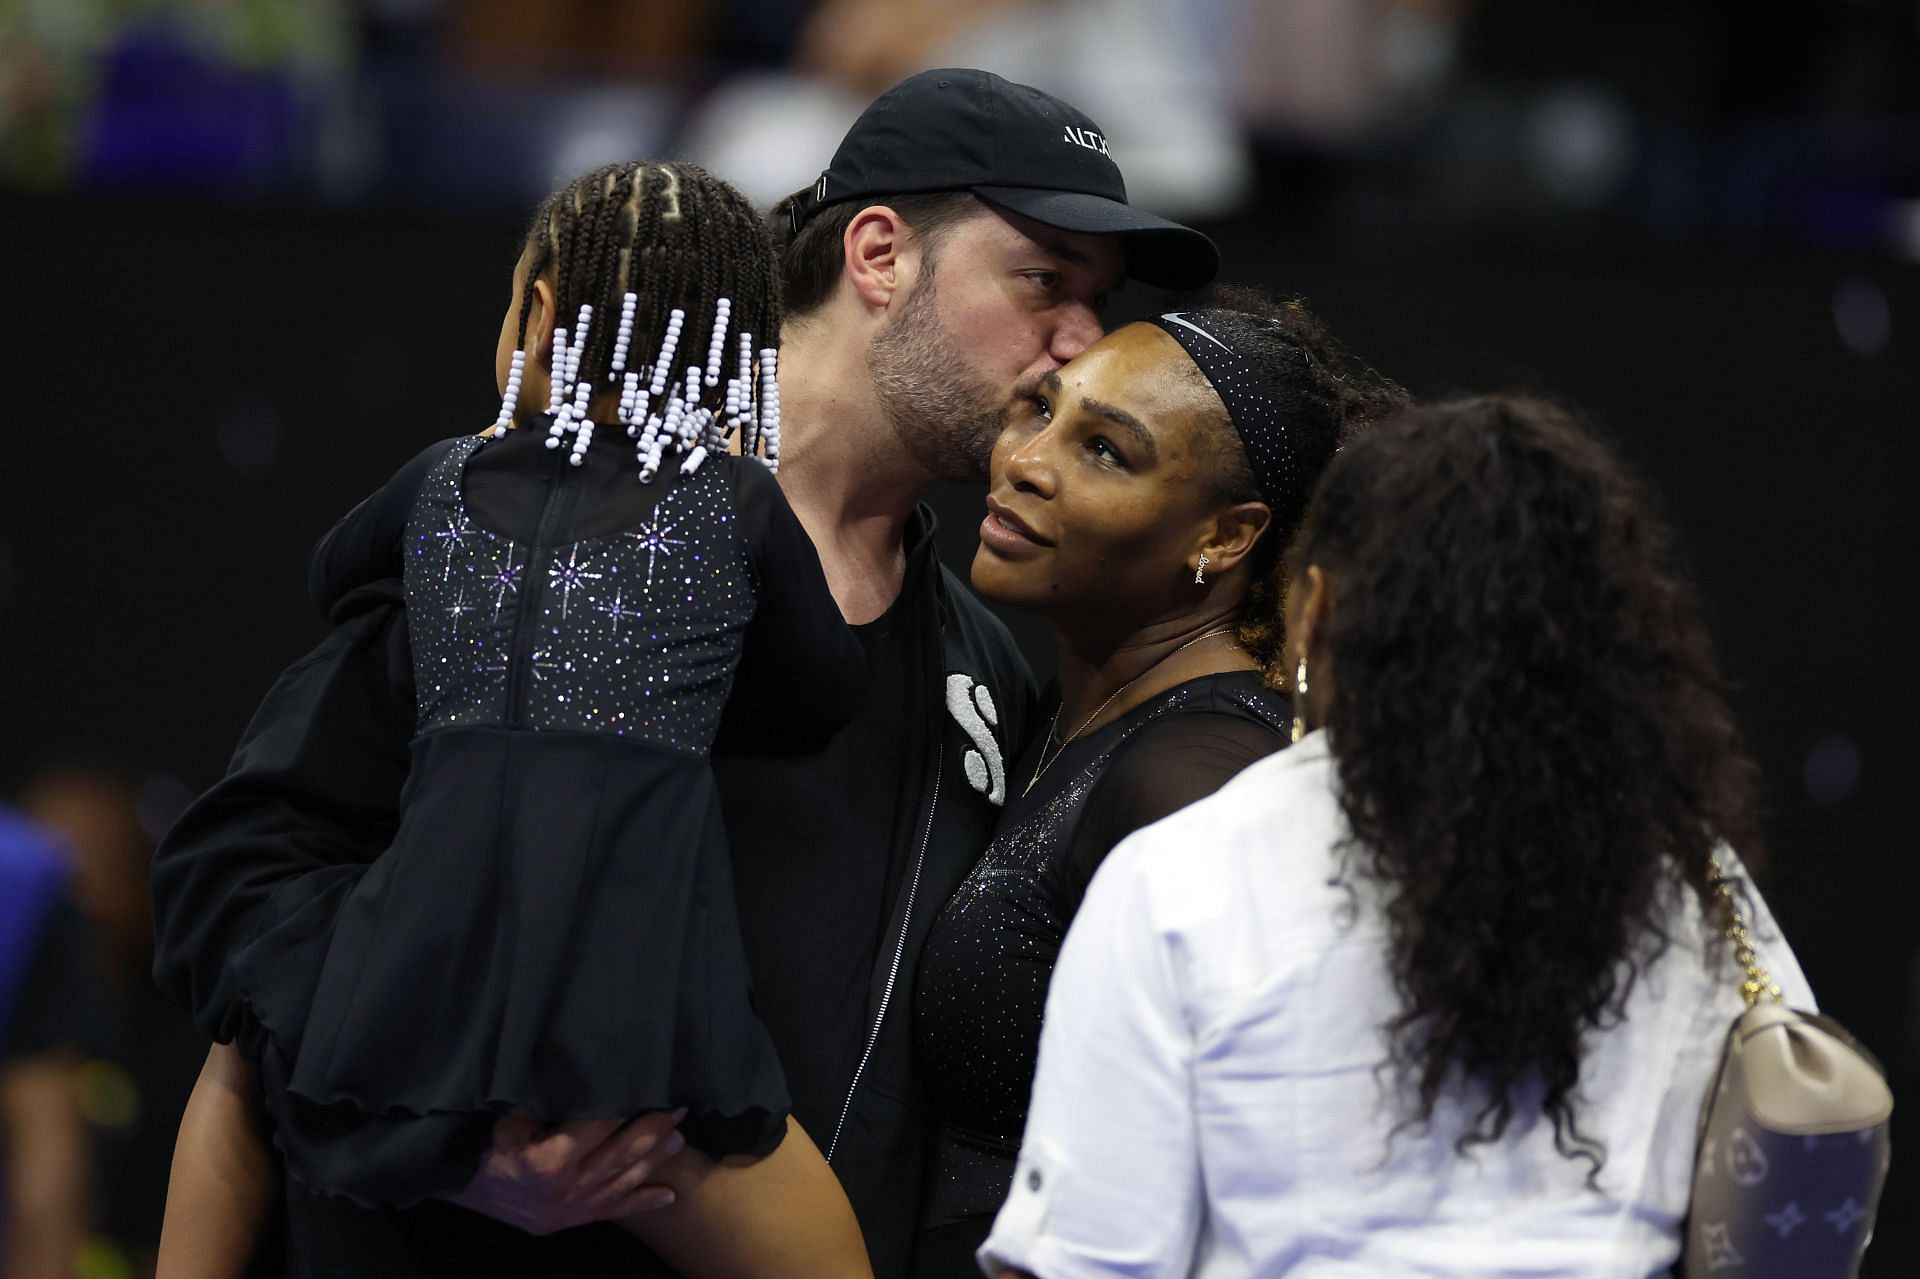 Alexis Ohanian and Serena Williams at the 2022 US Open